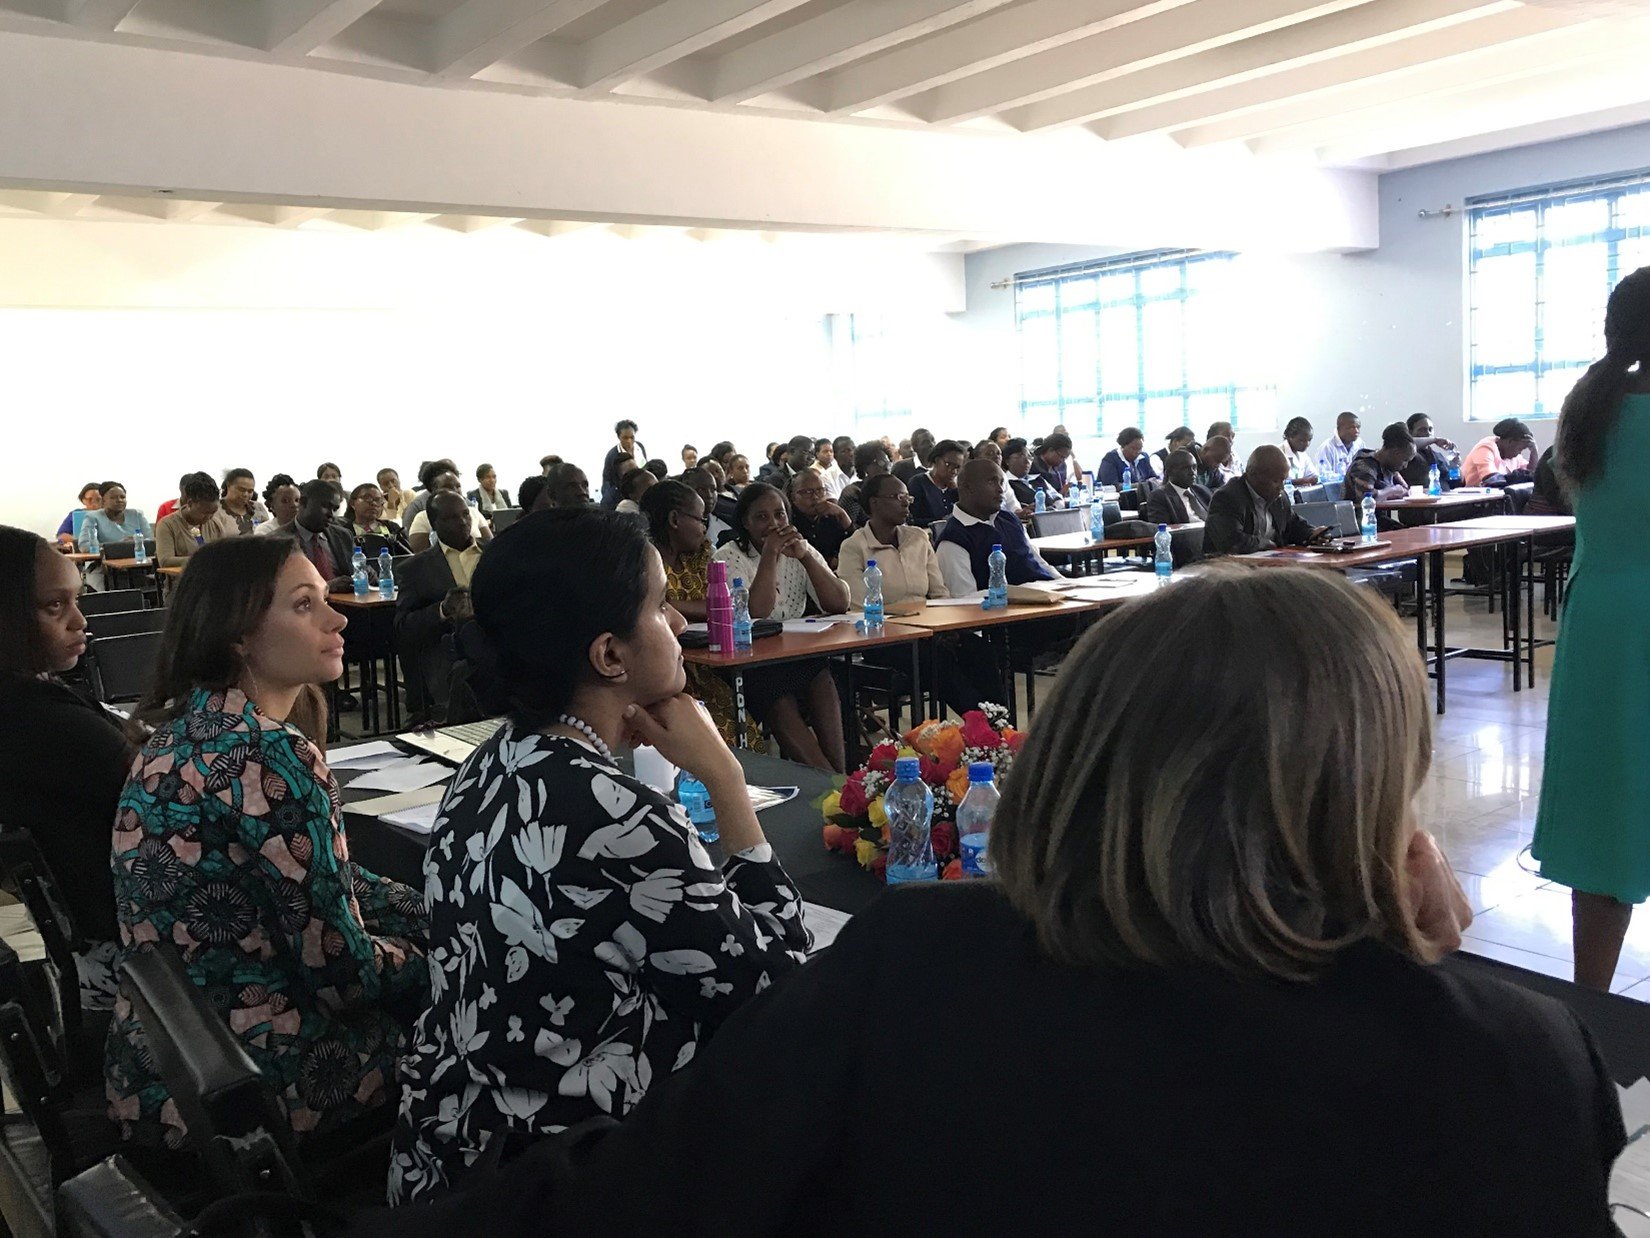  In 2019, IUSON, MTRH and MUSN collaborated for the first Clinical Nurse Educators Symposium. The symposium brought together nurses from North America and all of Uasin Gishu county to discuss innovations in nursing science and research that impact pa